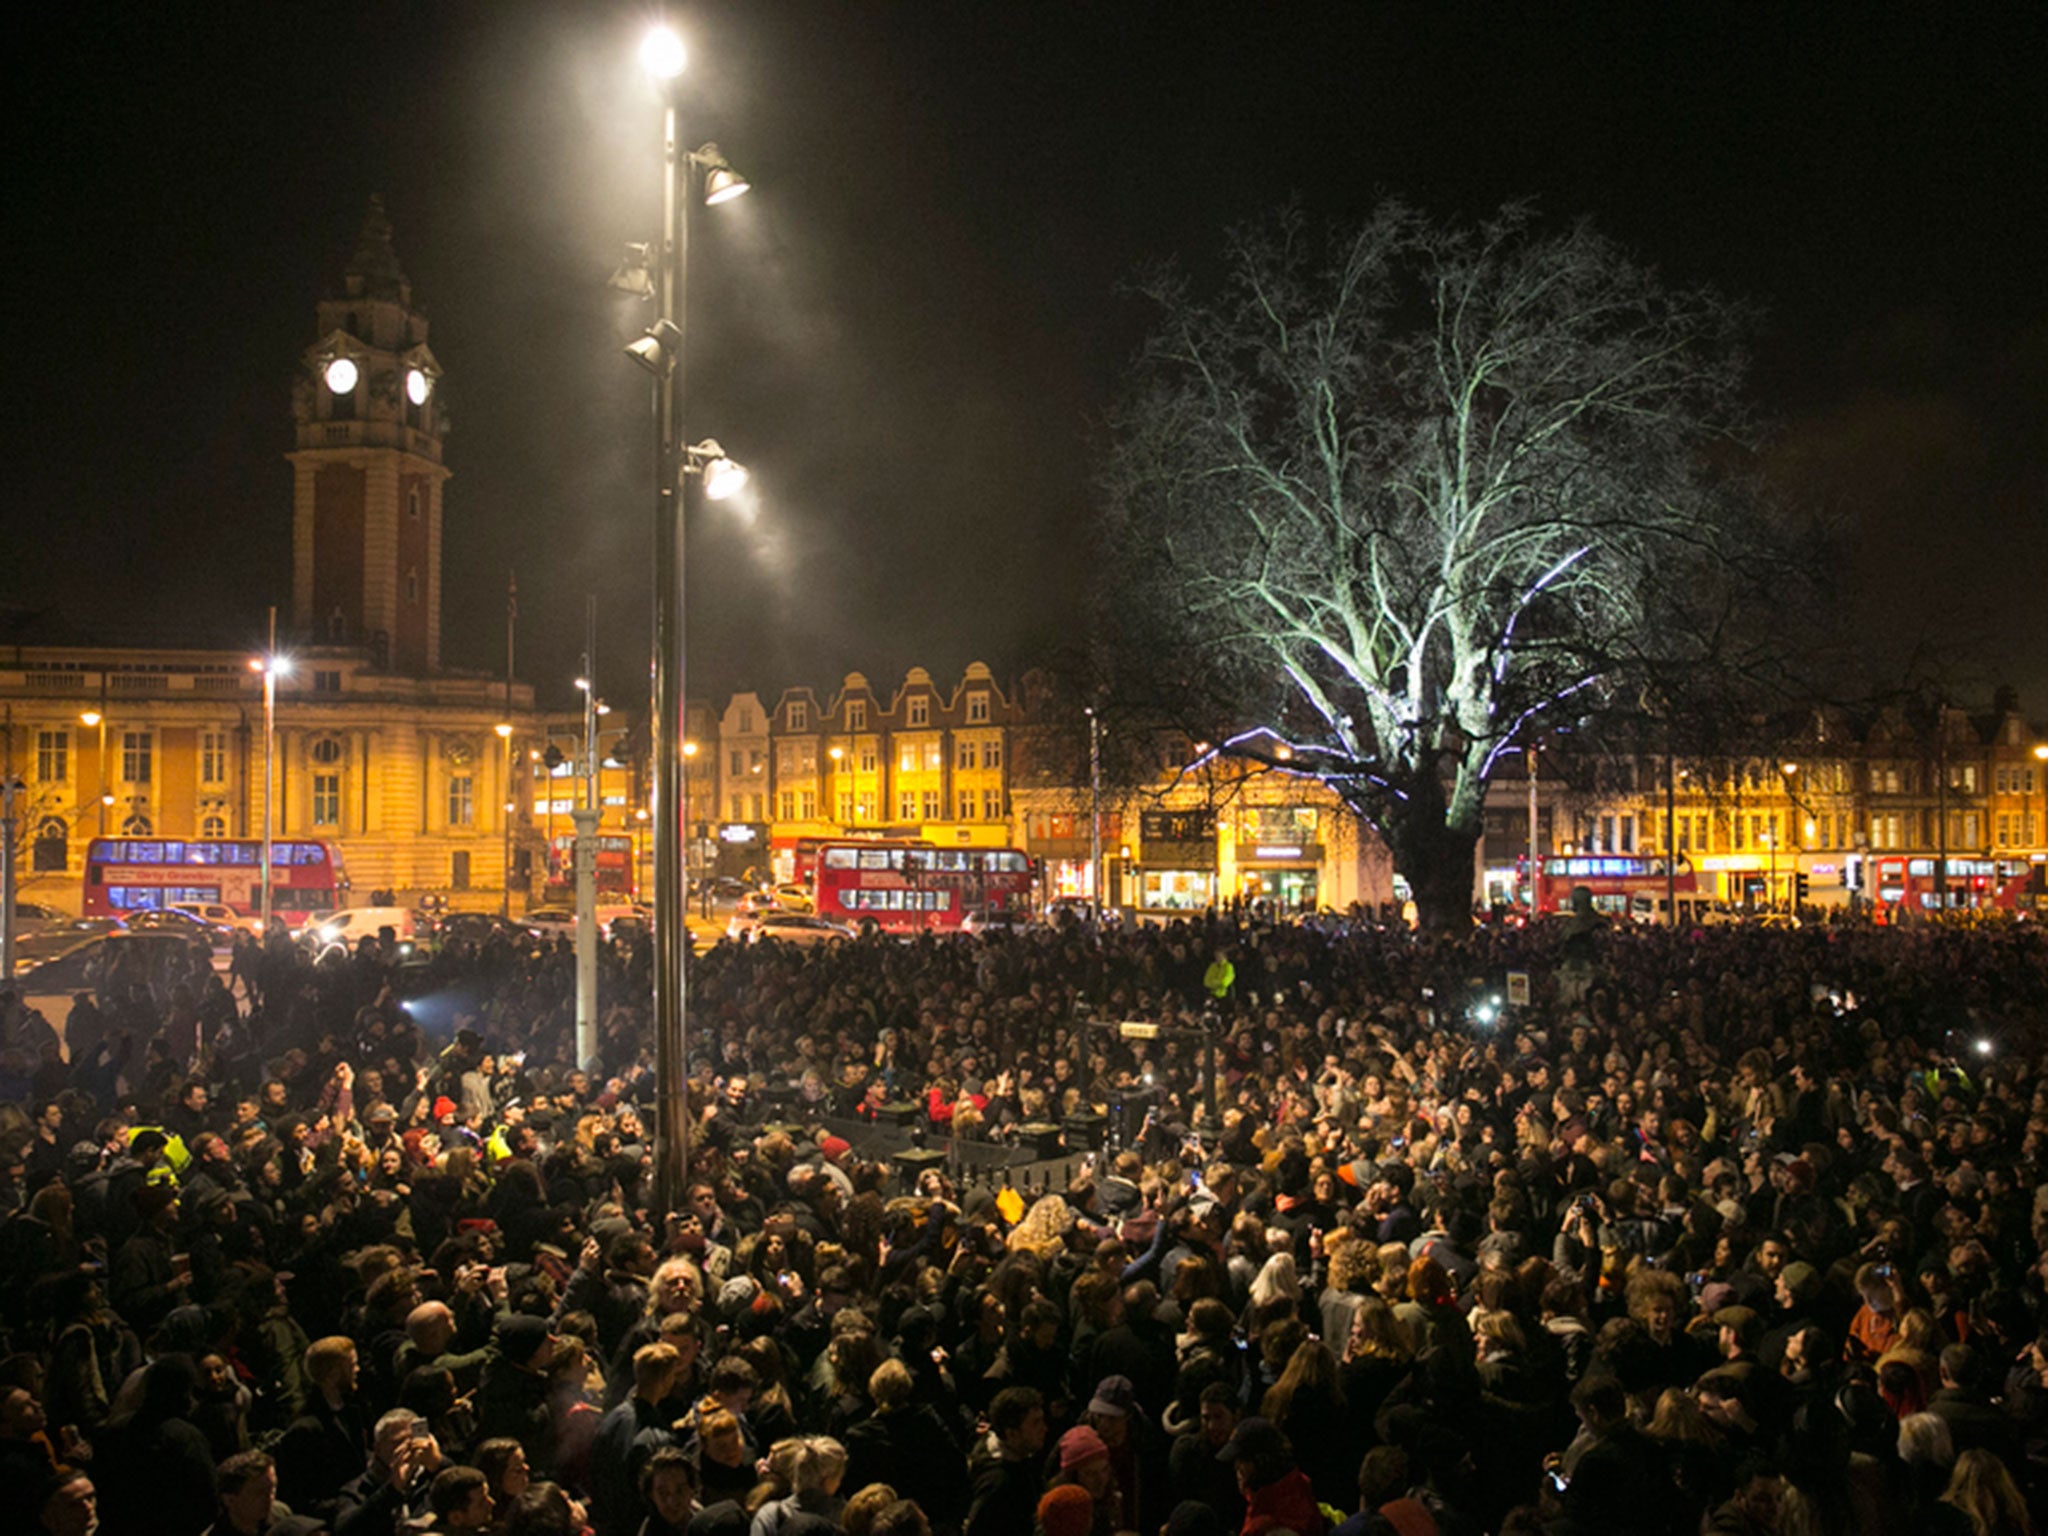 Brixton - where thousands gathered for a party earlier this year to celebrate the life of David Bowie